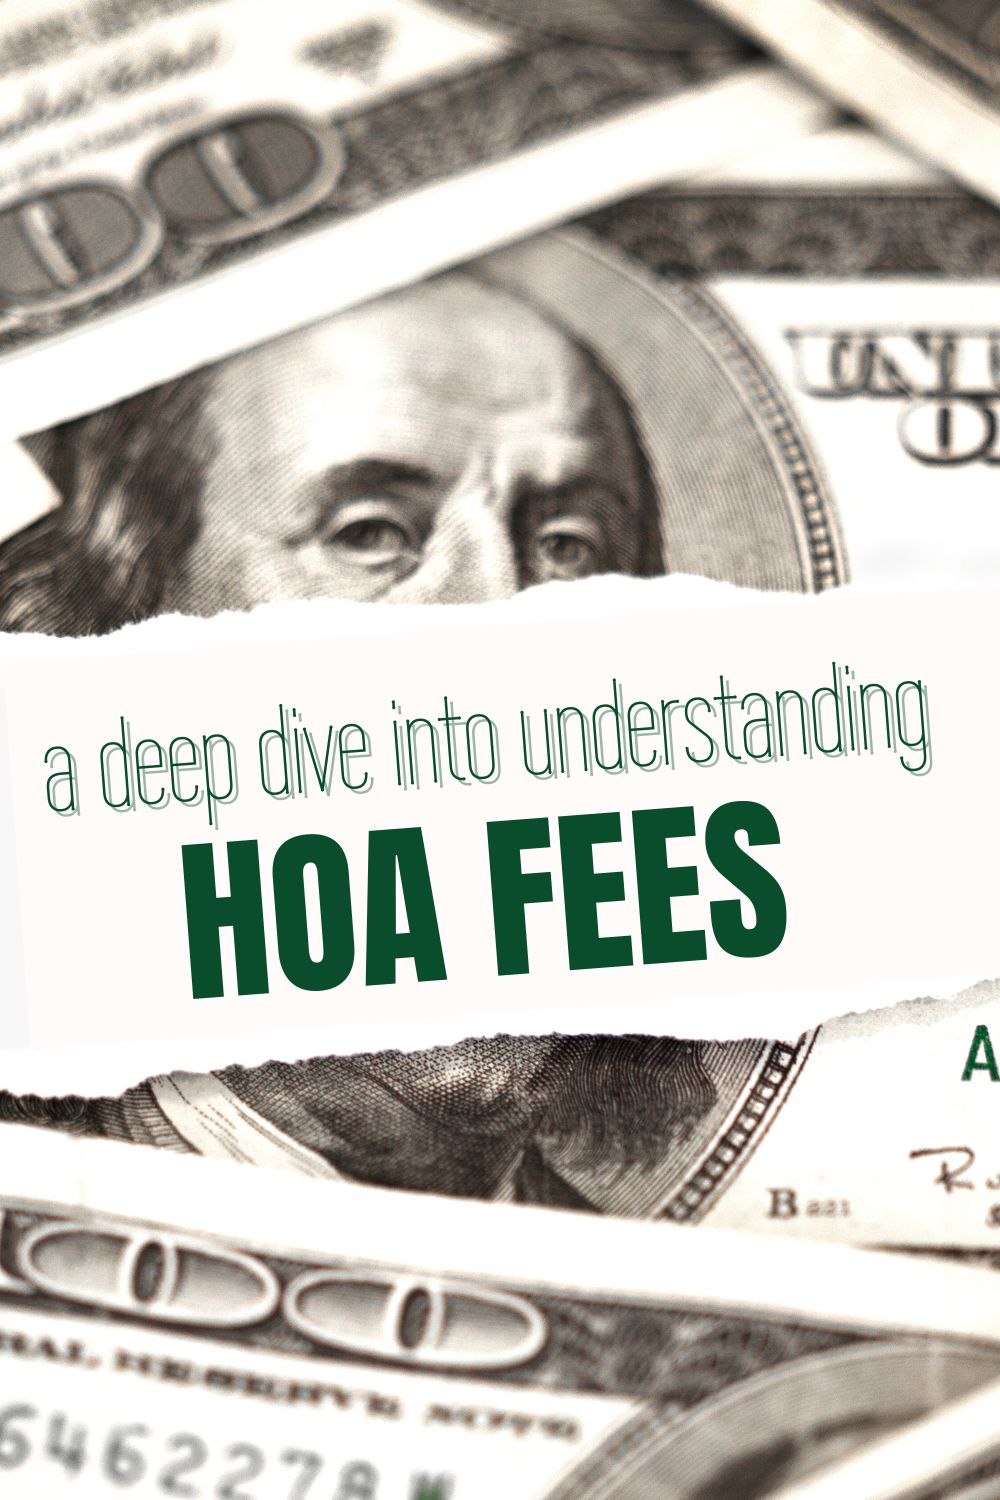 Understanding HOA fees and condo fees